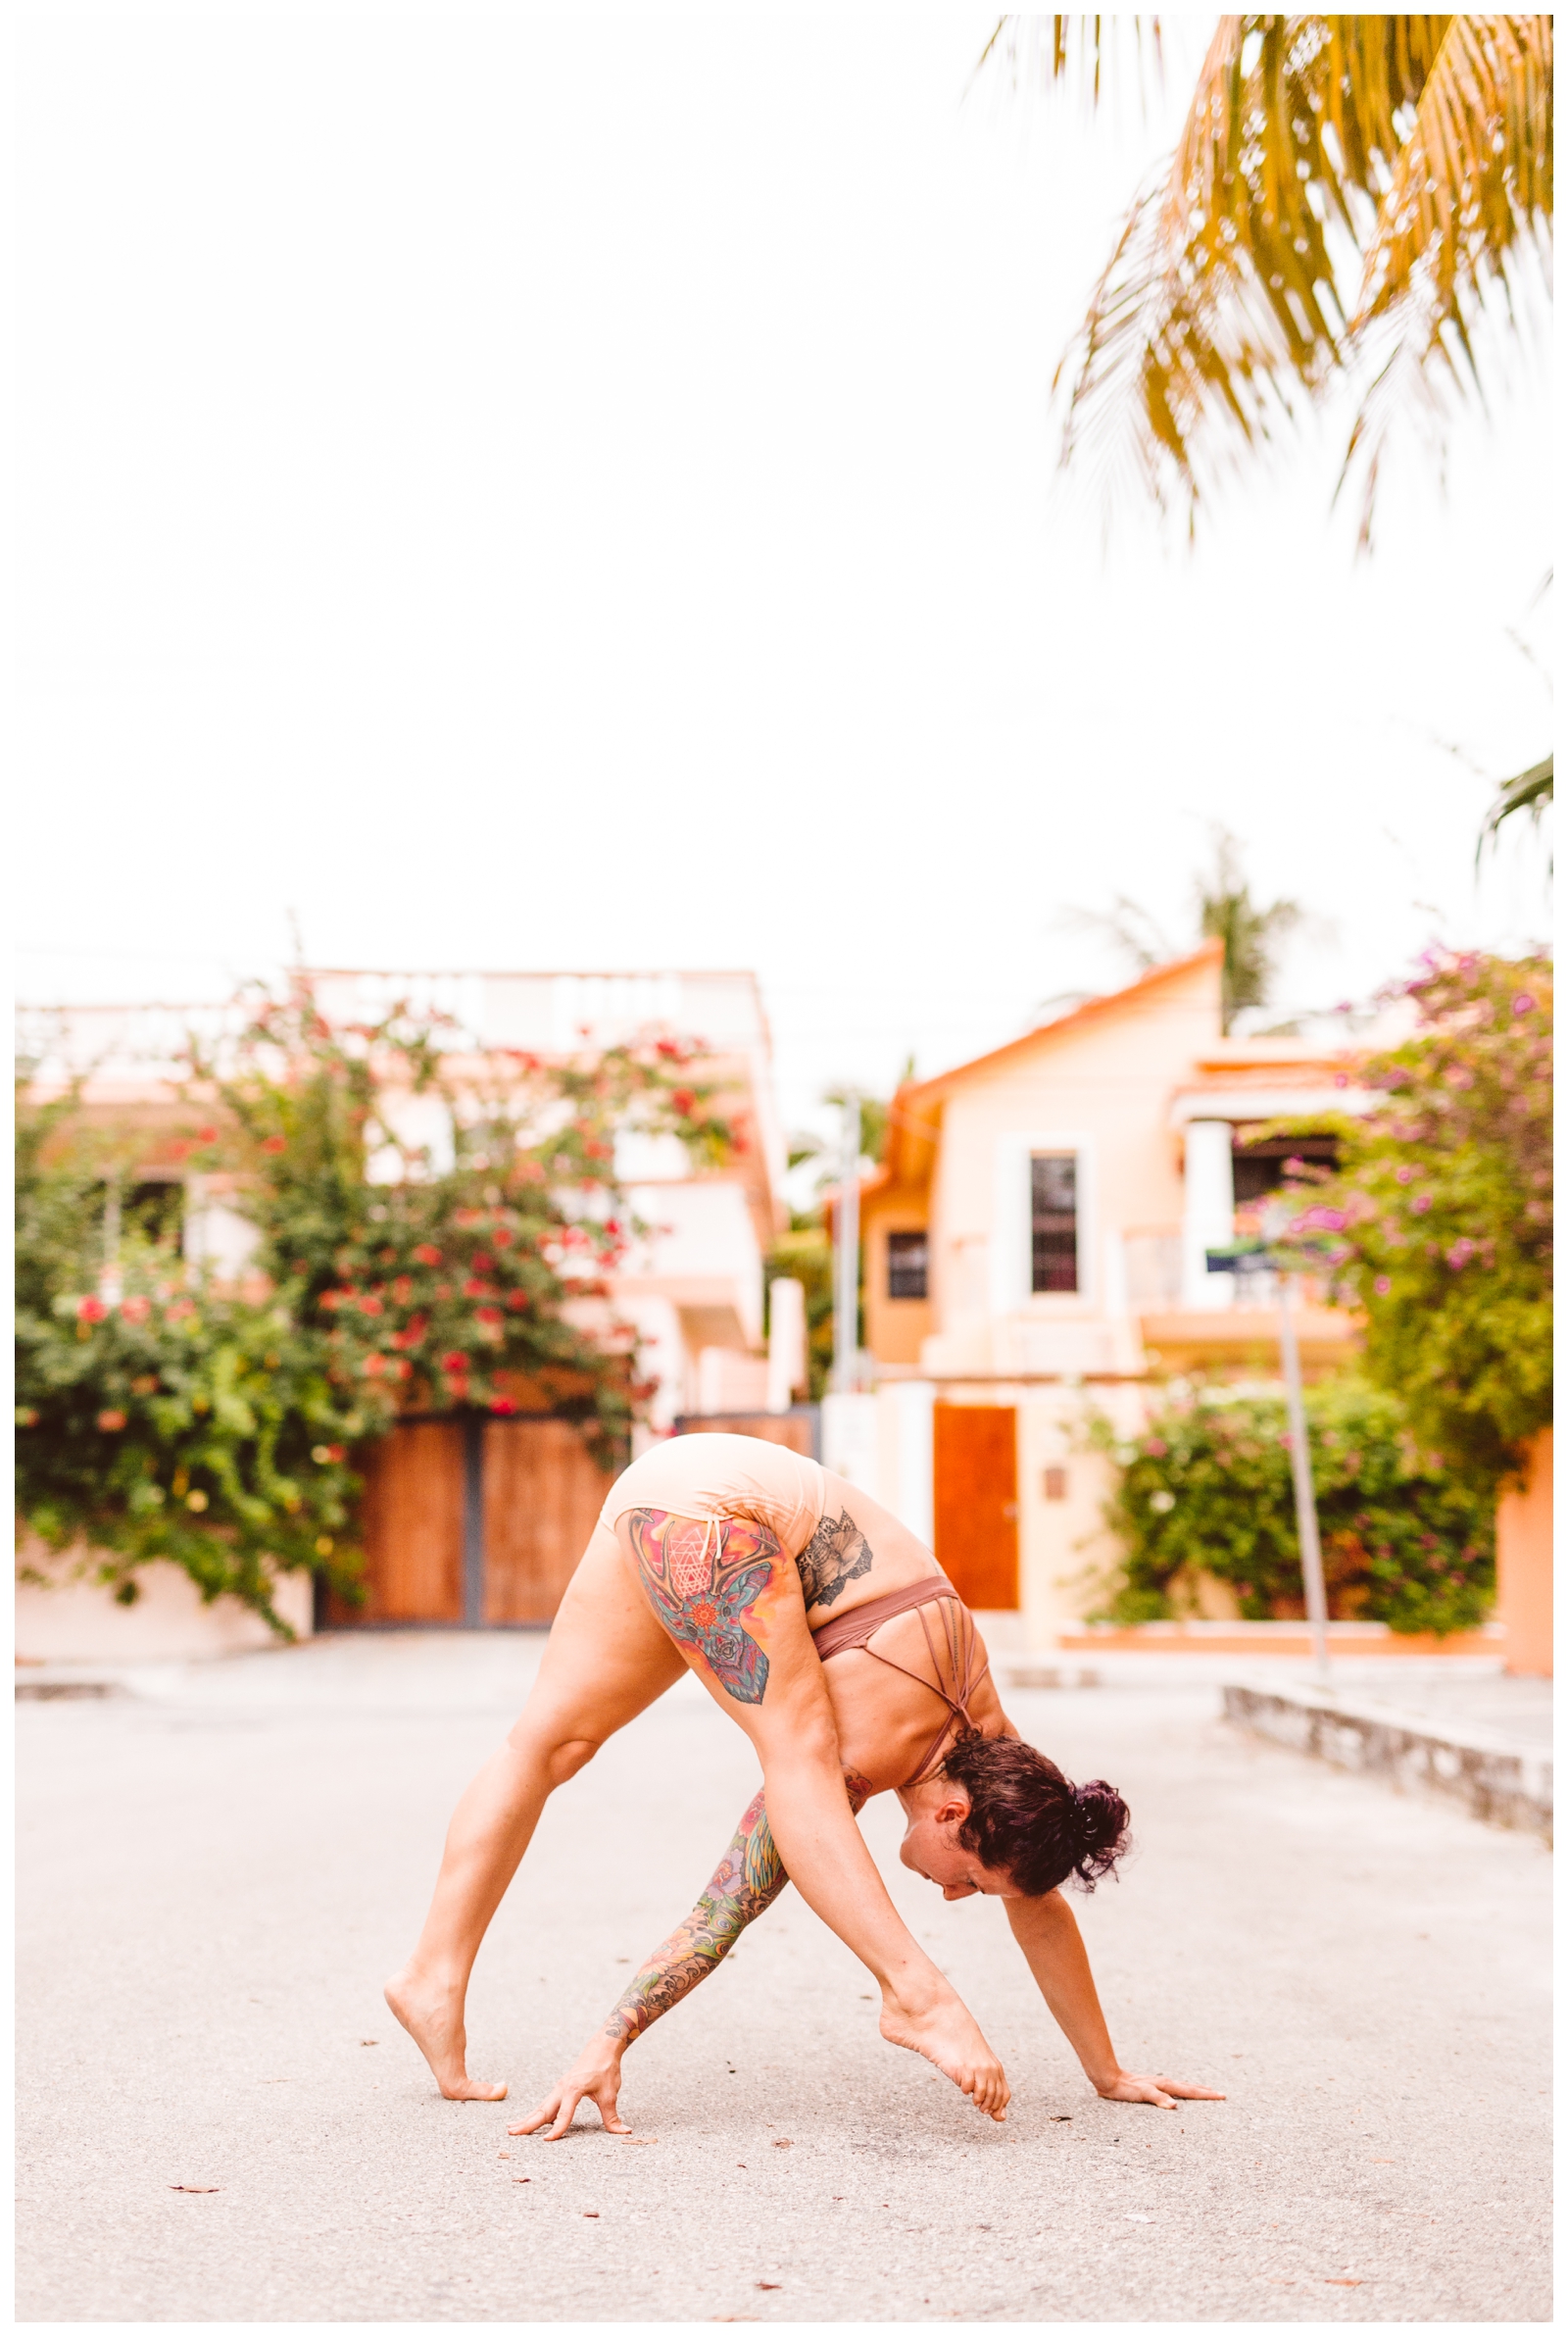 Puerto Morelos, Mexico Travel Guide and Inspiration - Yoga Intensive - Brooke Michelle Photography